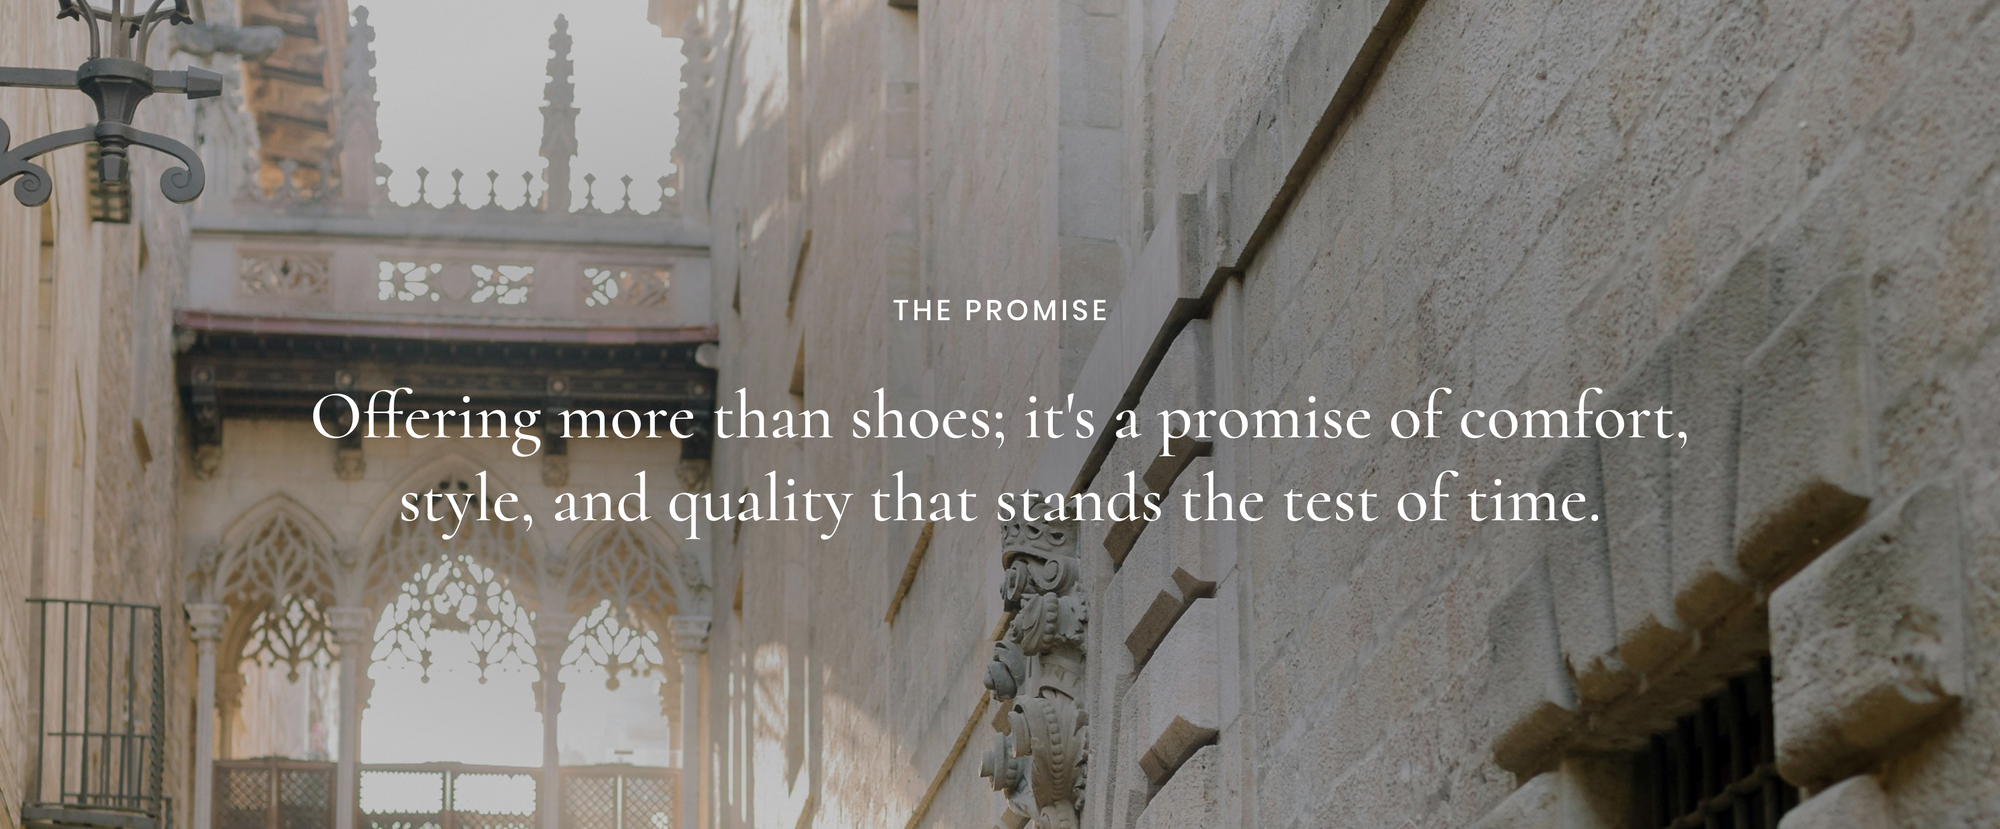 Offering more than shoes; it's a promise of comfort, style, and quality that stands the test of time